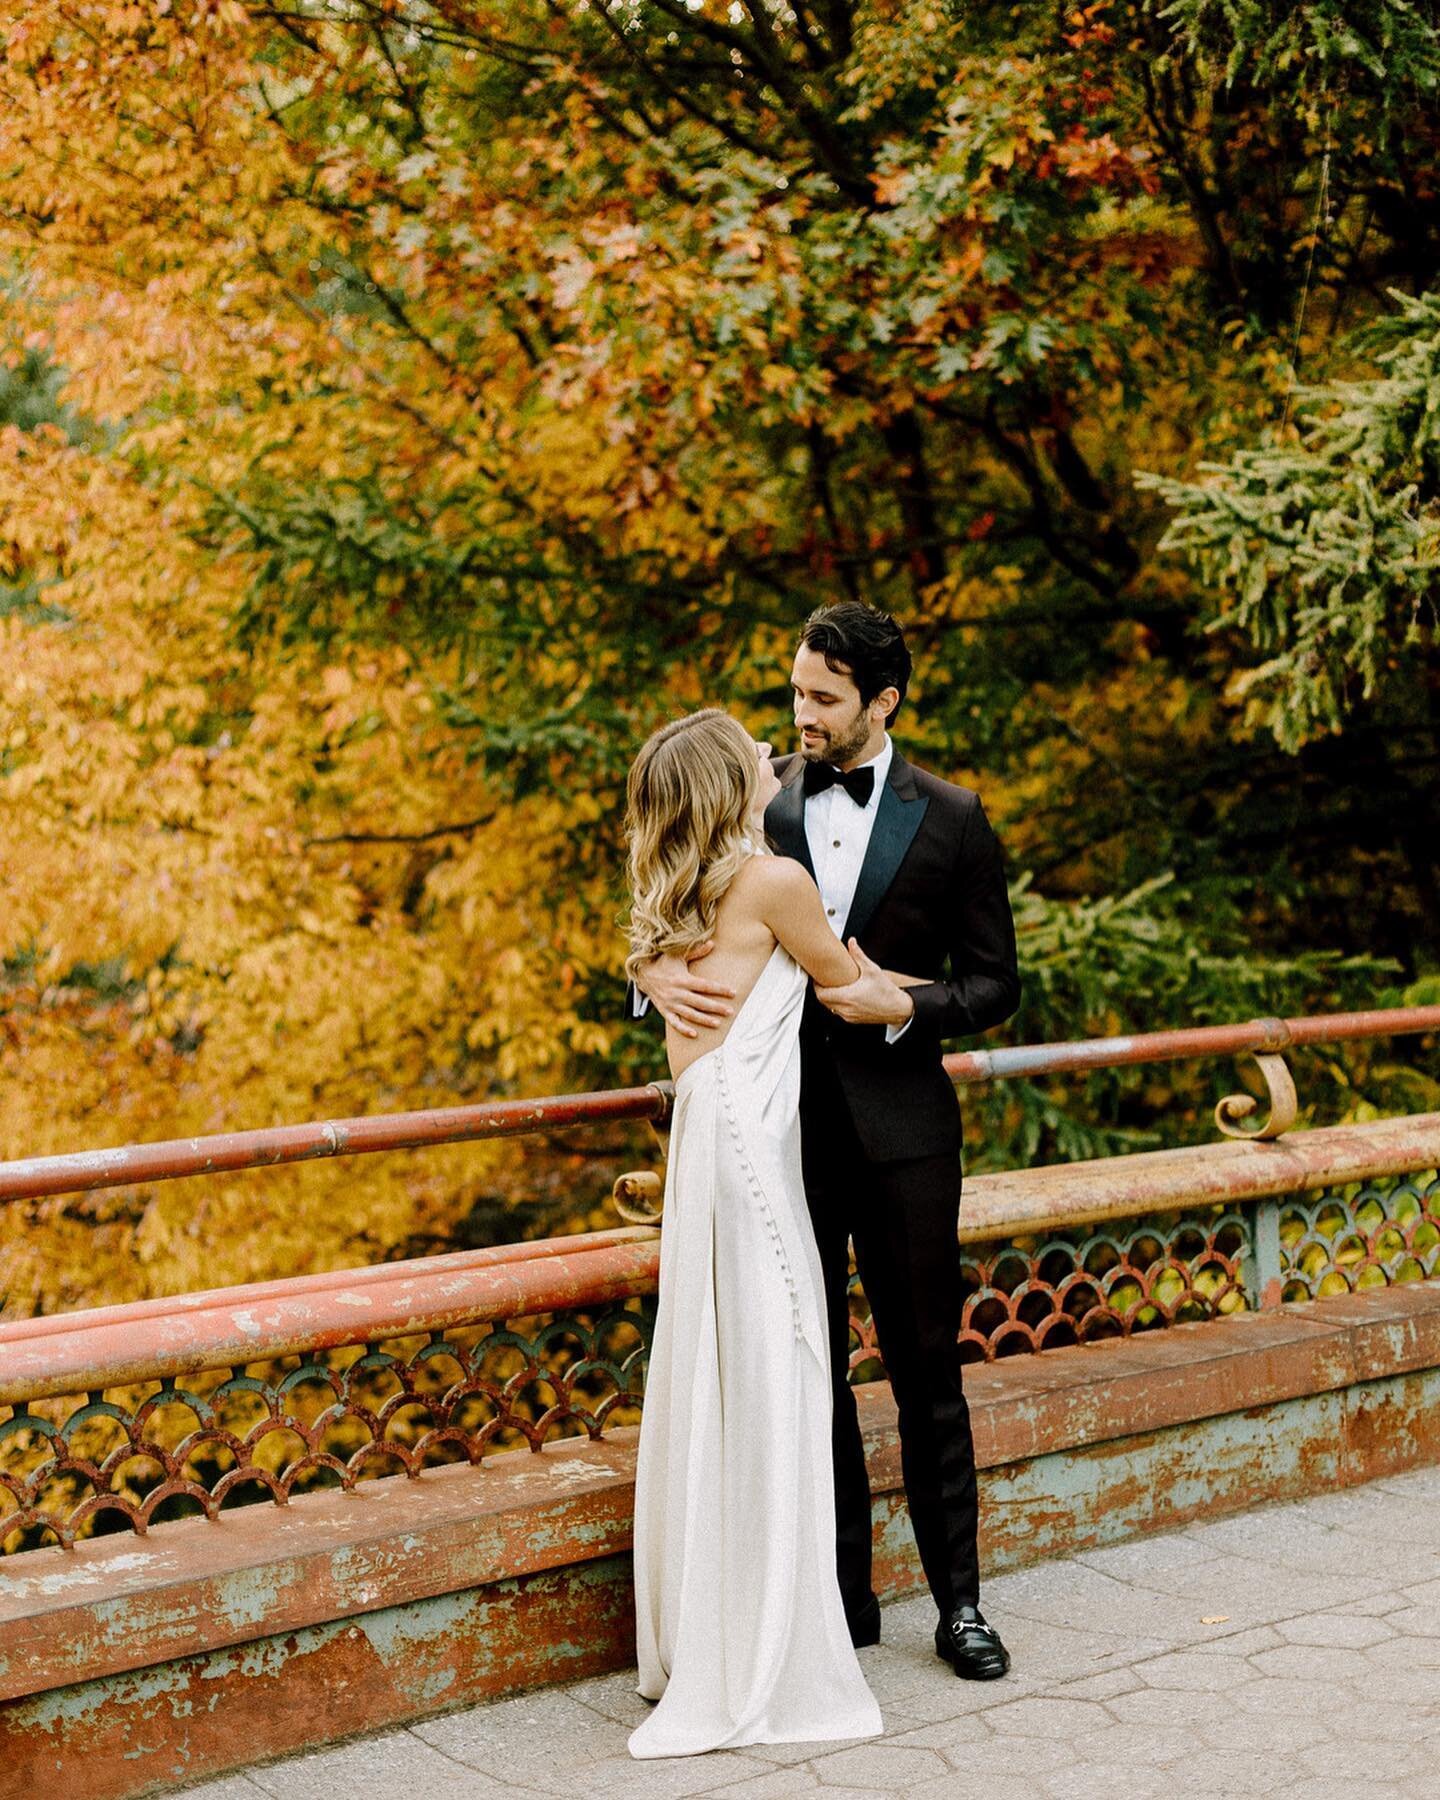 pro tip for couples who are camera shy: go for a walk while you're taking your portraits, and let your photographer work their candid magic! you don't need to have model-level posing skills to get the sweetest couple photos on your wedding day.
.
.
.